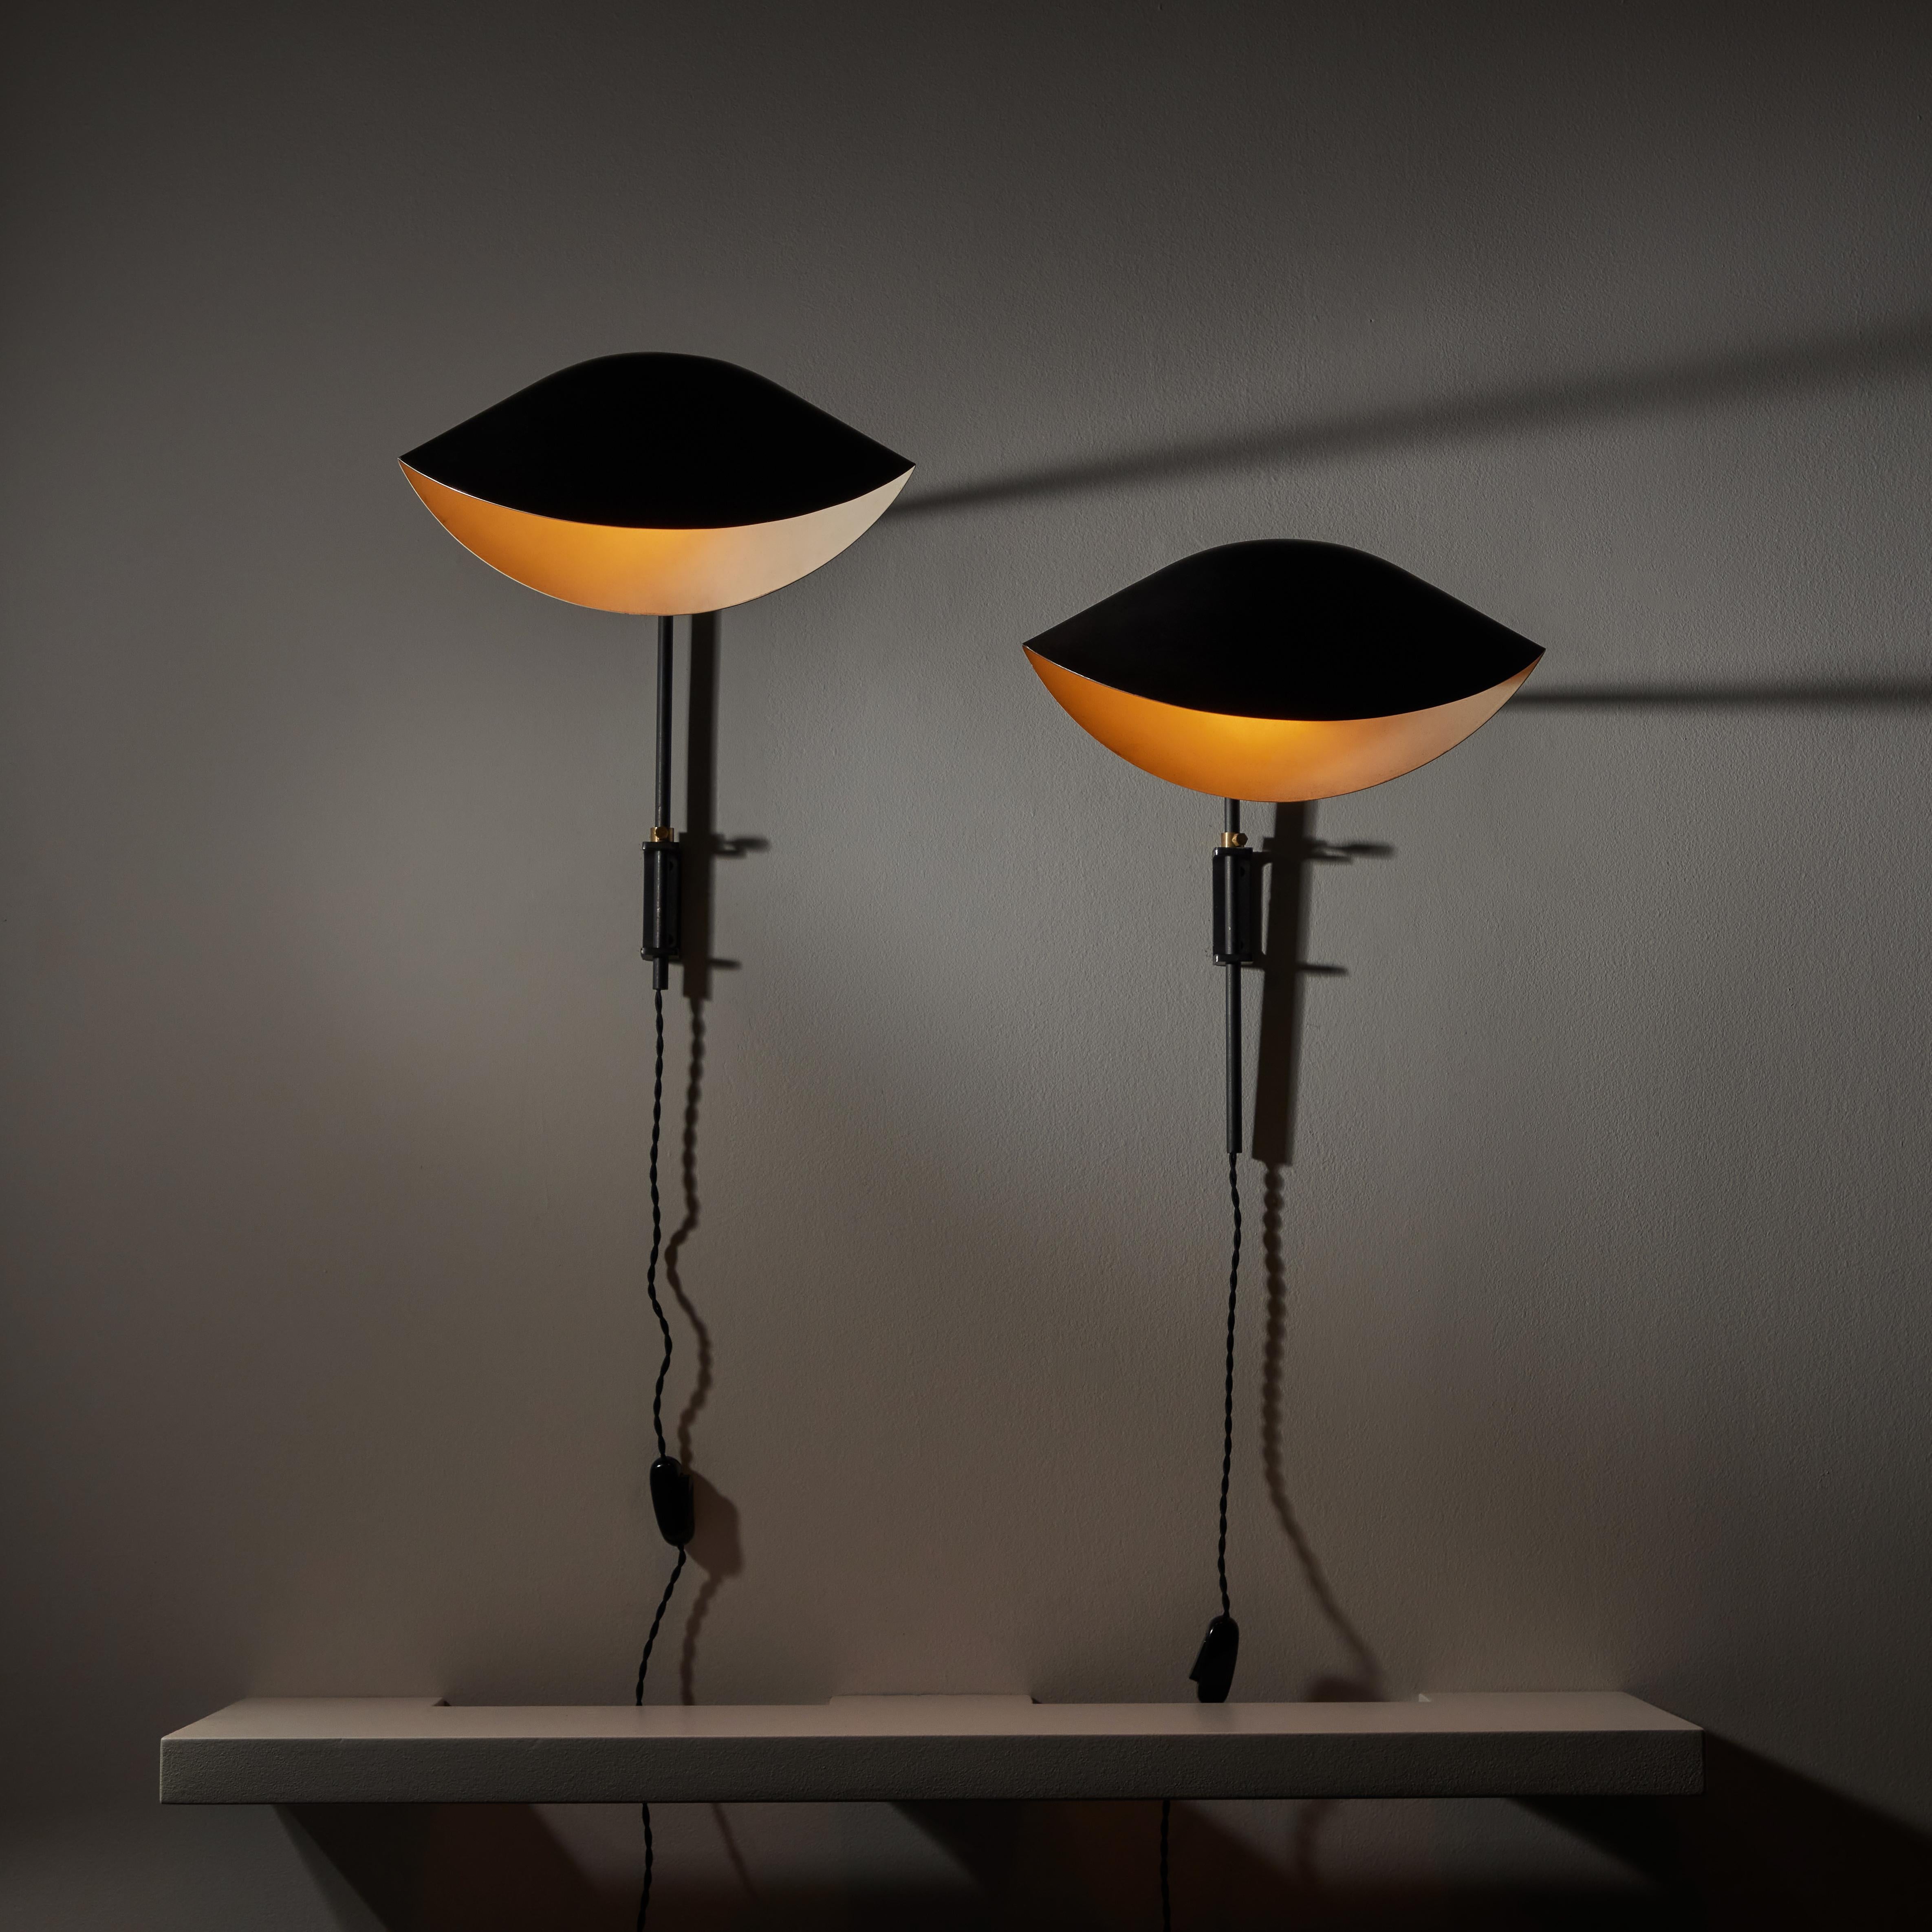 Pair of Antony Sconces by Serge Mouille. Manufactured in France, circa the 1970s. Wall mounted black enameled steel and aluminum sconces with timeless delicate and curved shade. Each lamp holds one bayonet bulb socket. We recommend using a 40w